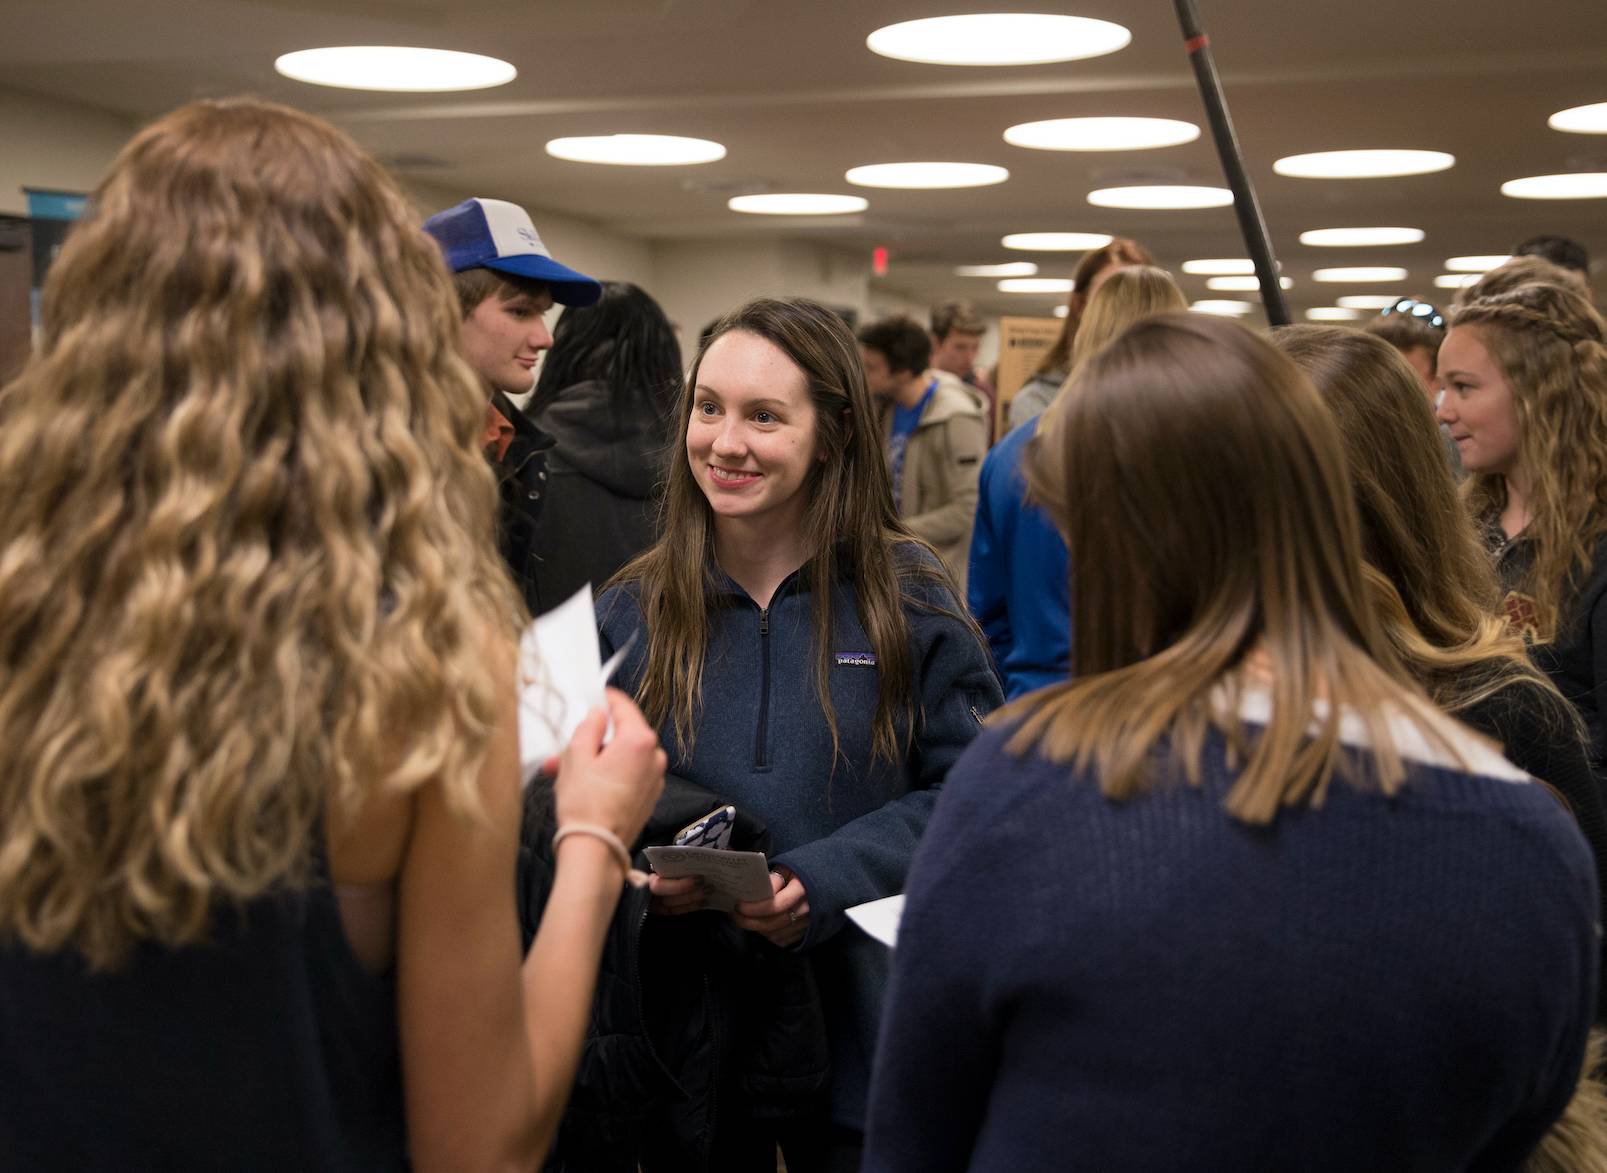 Student smiling while talking to a group at campus life night